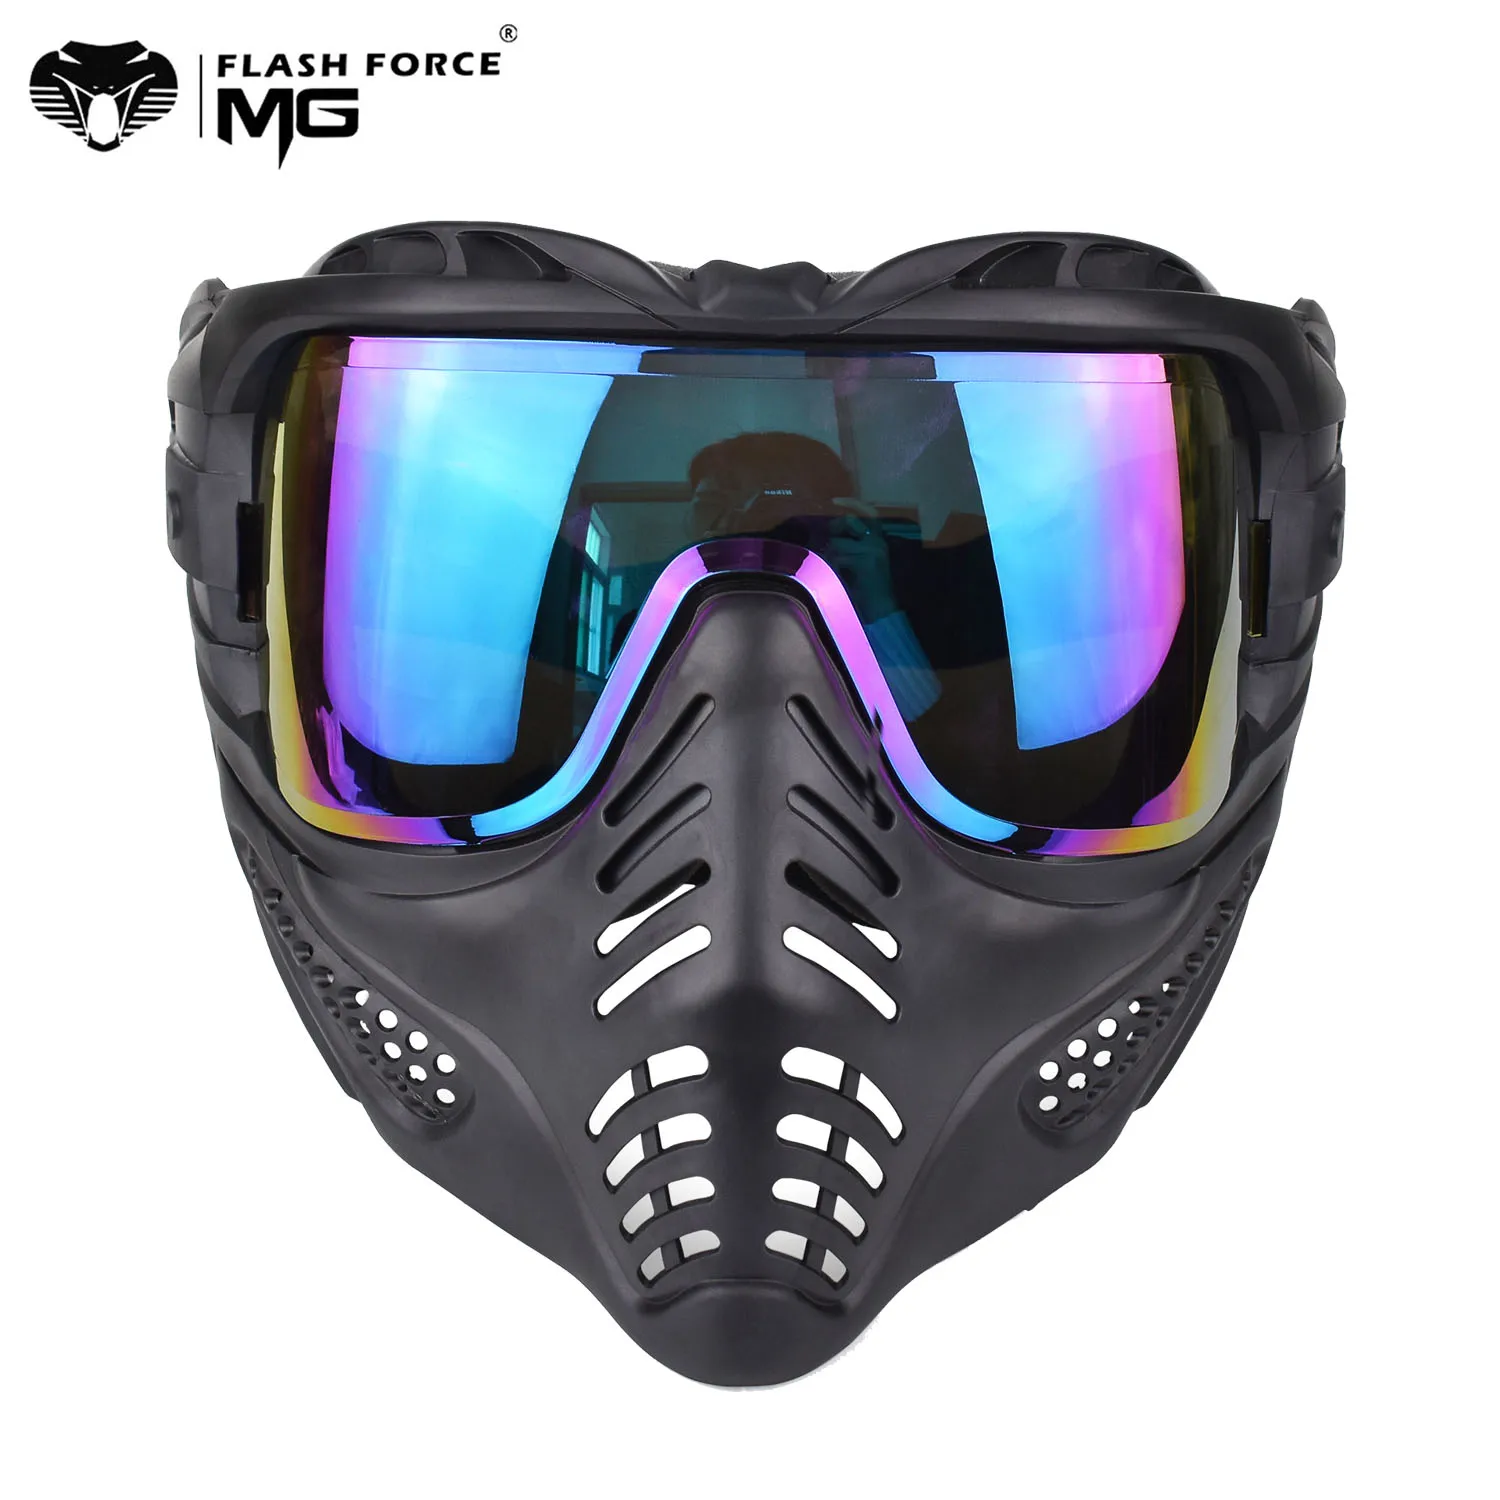 Airsoft Mask CO2 Gun Accessories Paintball Tactical Masks Breathable Anti-Fog PC Lens Protective Shooting Equipment